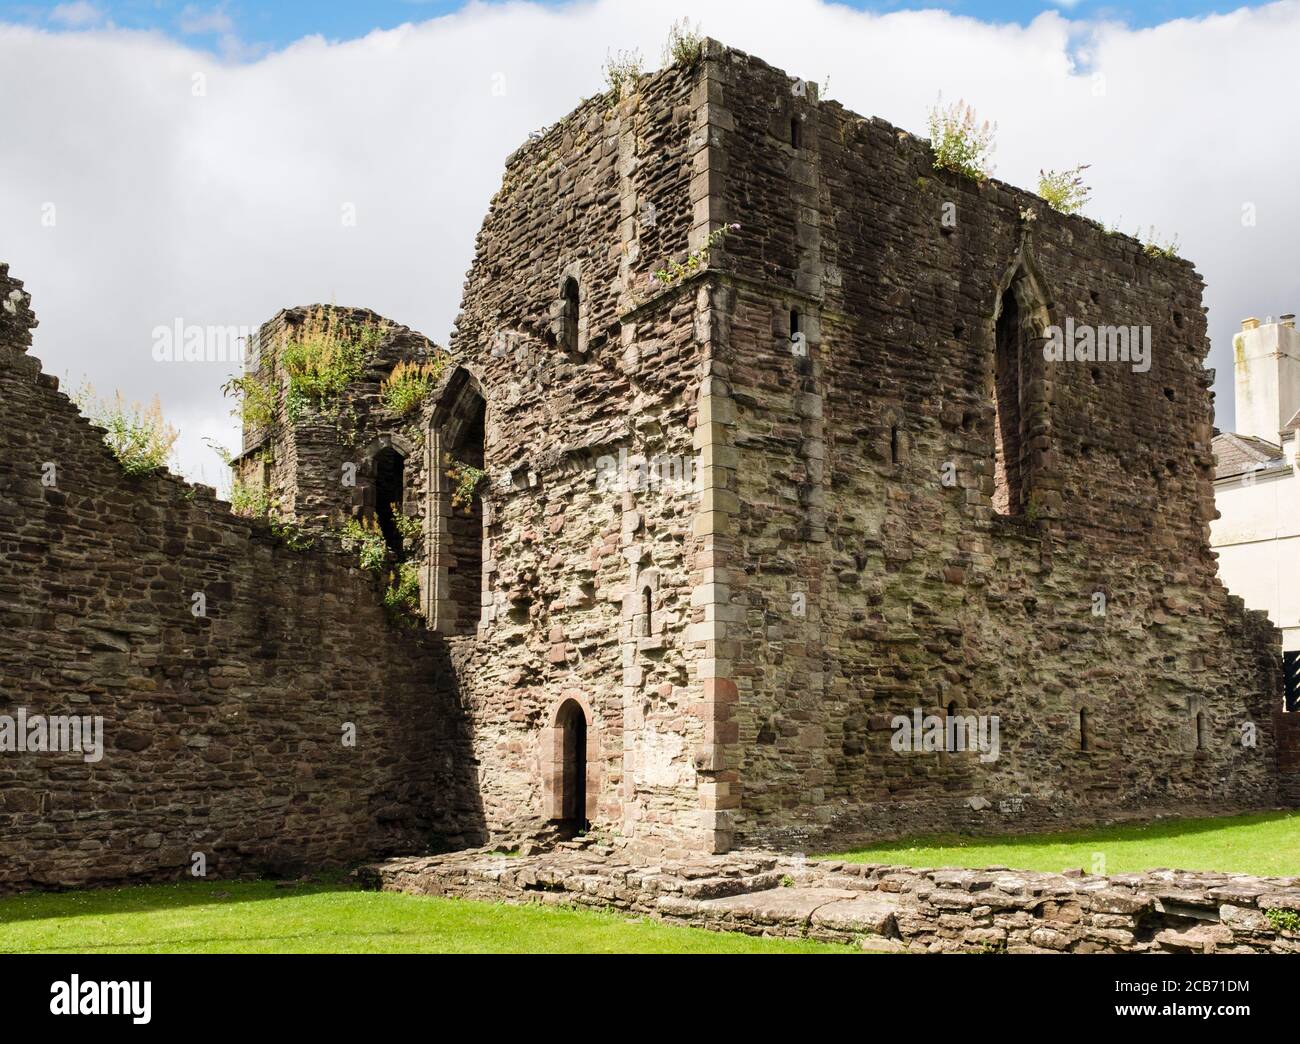 Ruins of Great Tower and Hall of Norman Castle (1067) in border town of Monmouth, Monmouthshire, Wales, UK, Britain Stock Photo